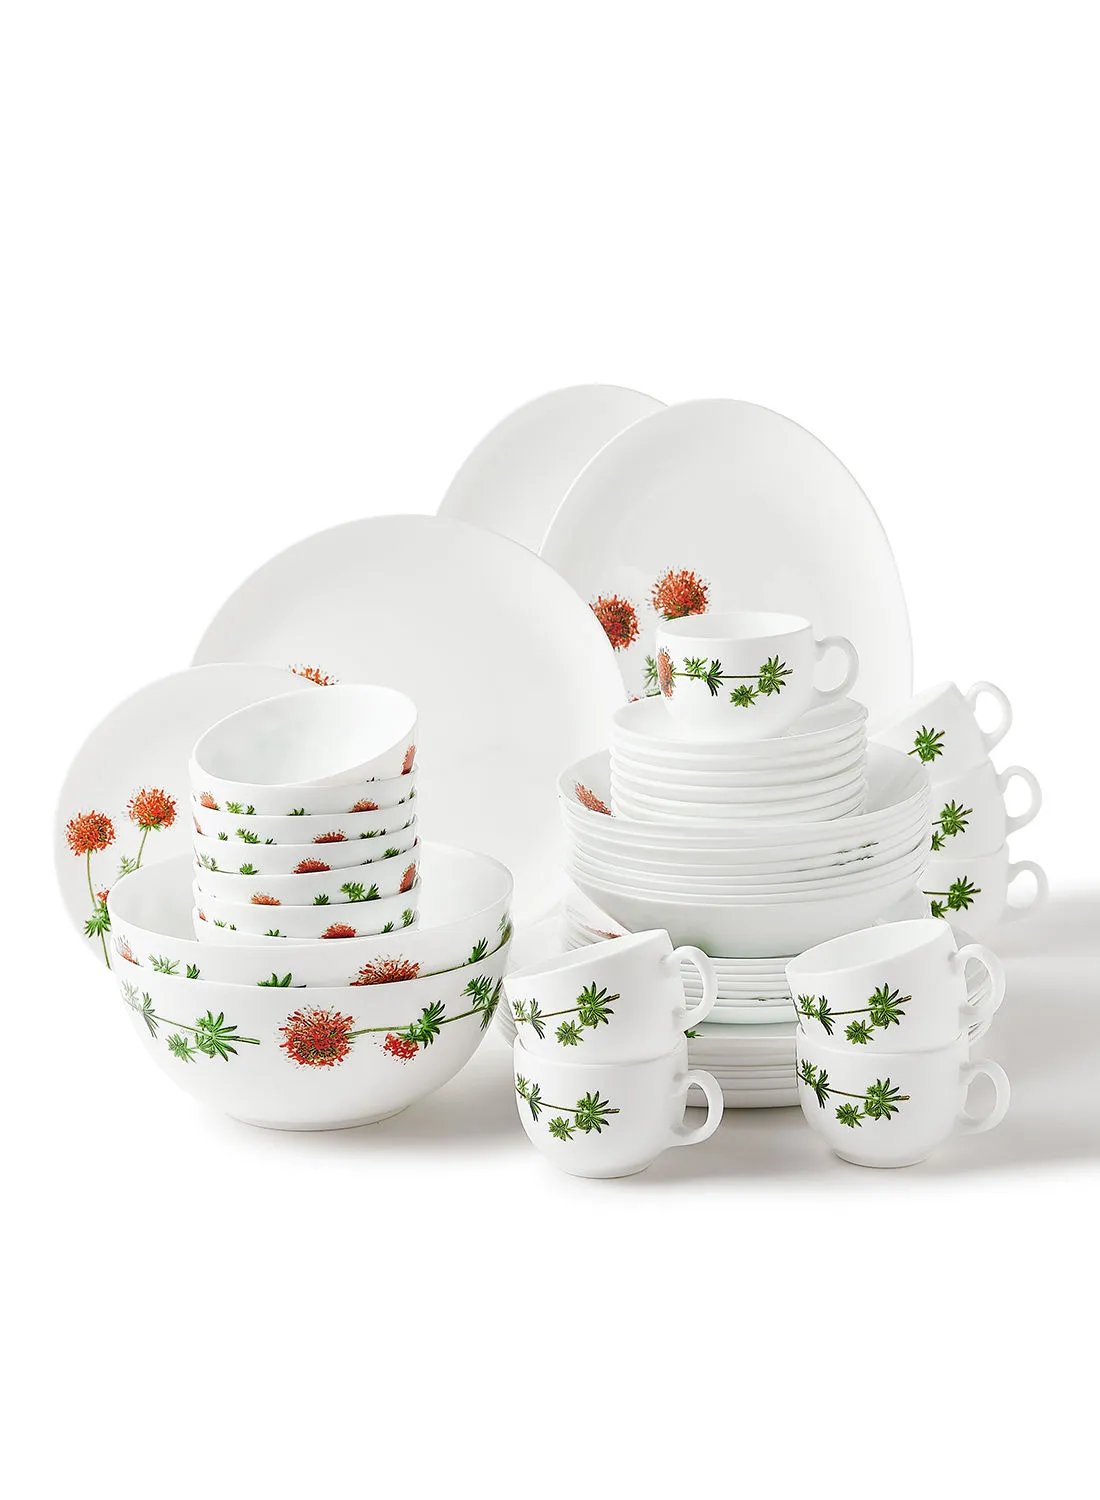 noon east 52 Piece Opalware Dinner Set For Everyday Use - Light Weight Dishes, Plates - Dinner Plate, Side Plate, Bowl, Cups, Serving Dish And Bowl - Serves 8 - Printed Design Jansen